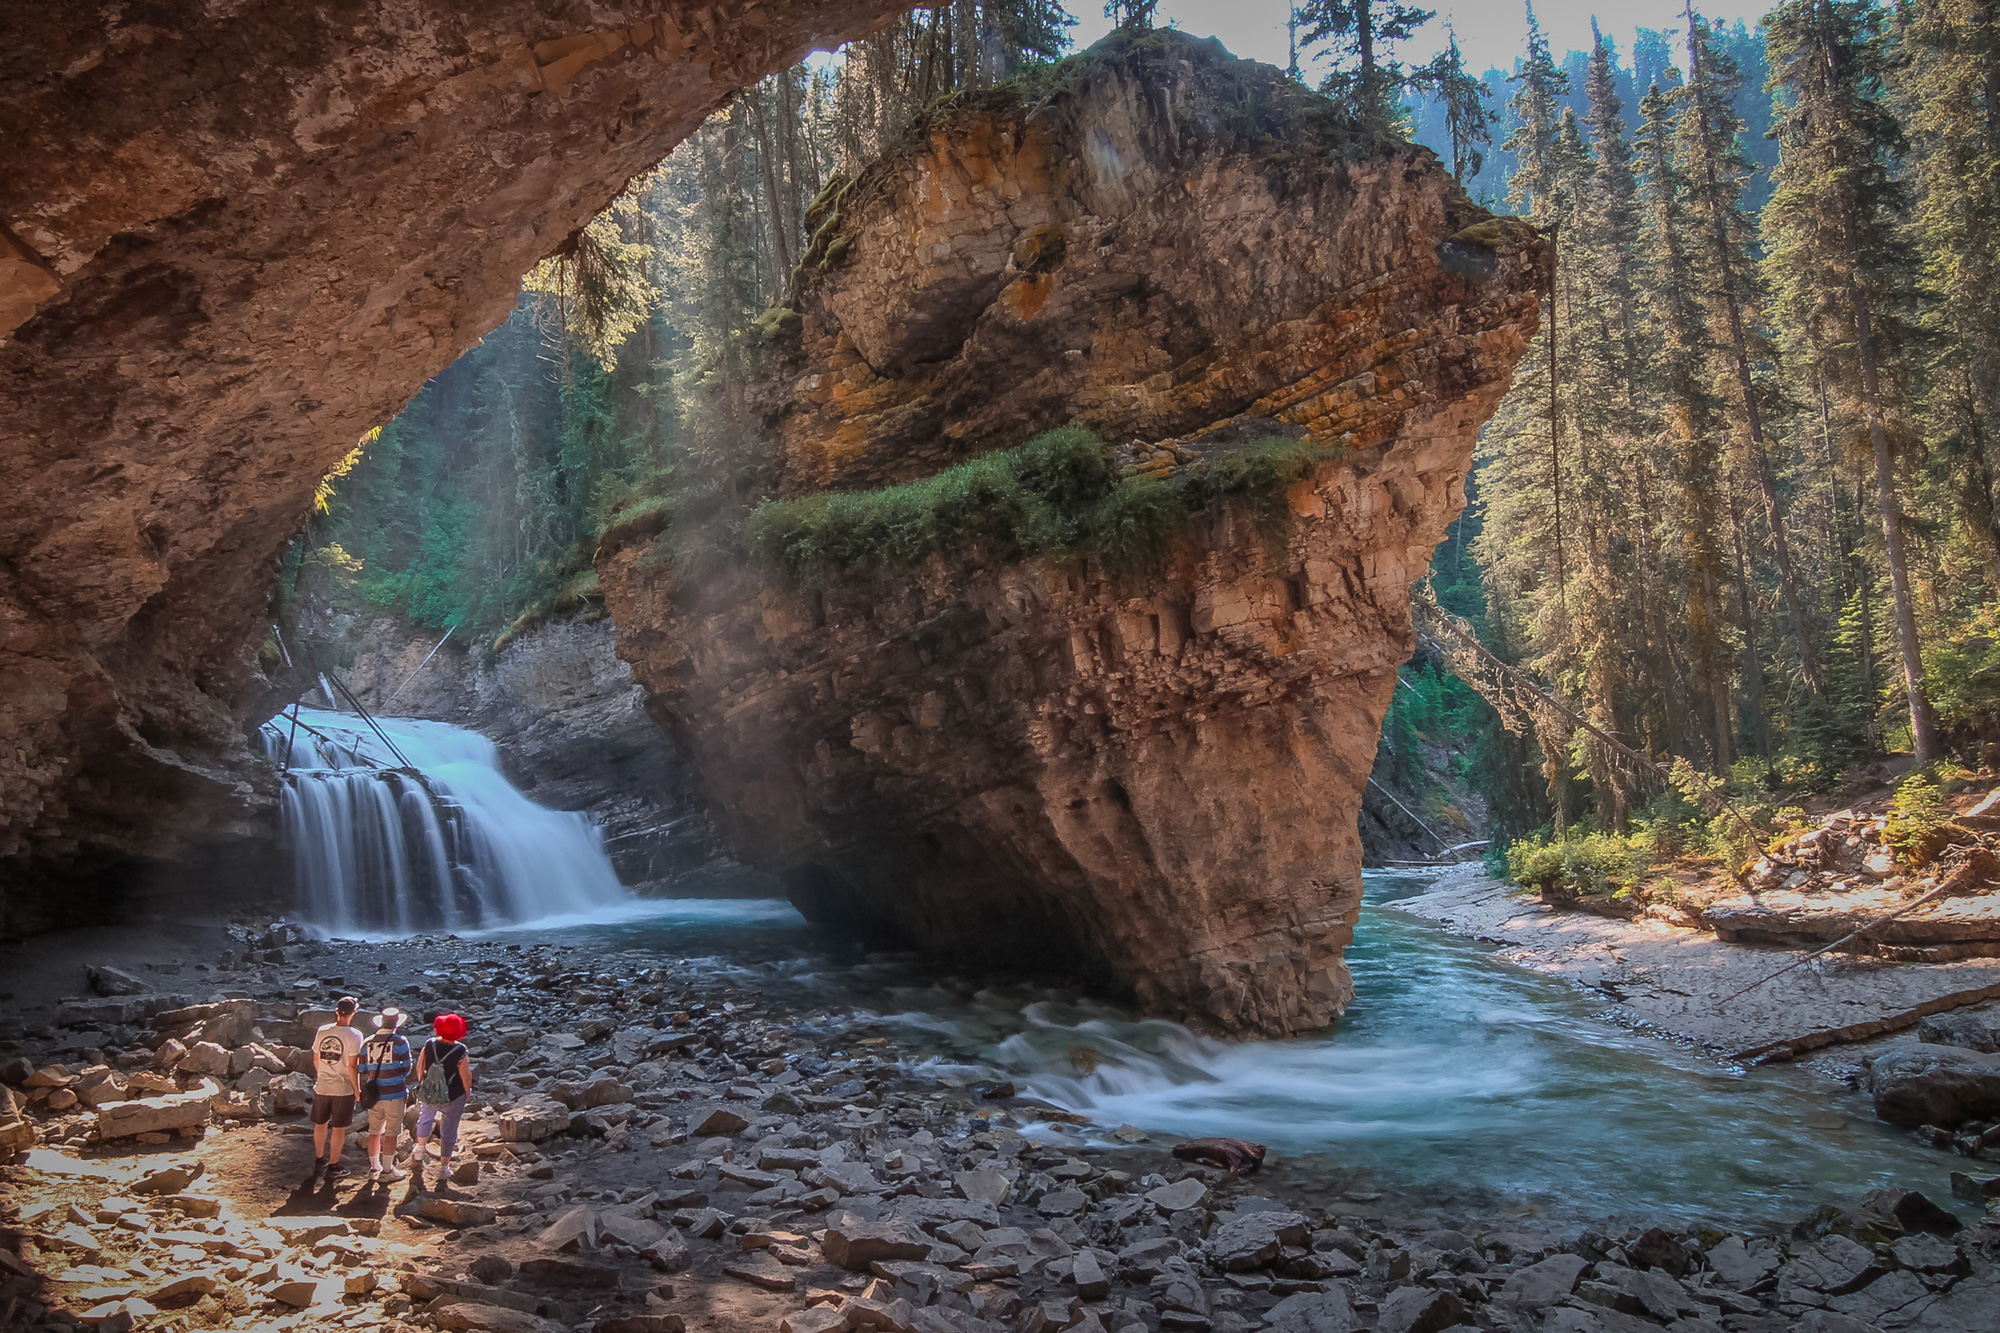 Johnston Canyon is one of the top things to do in Banff all year round